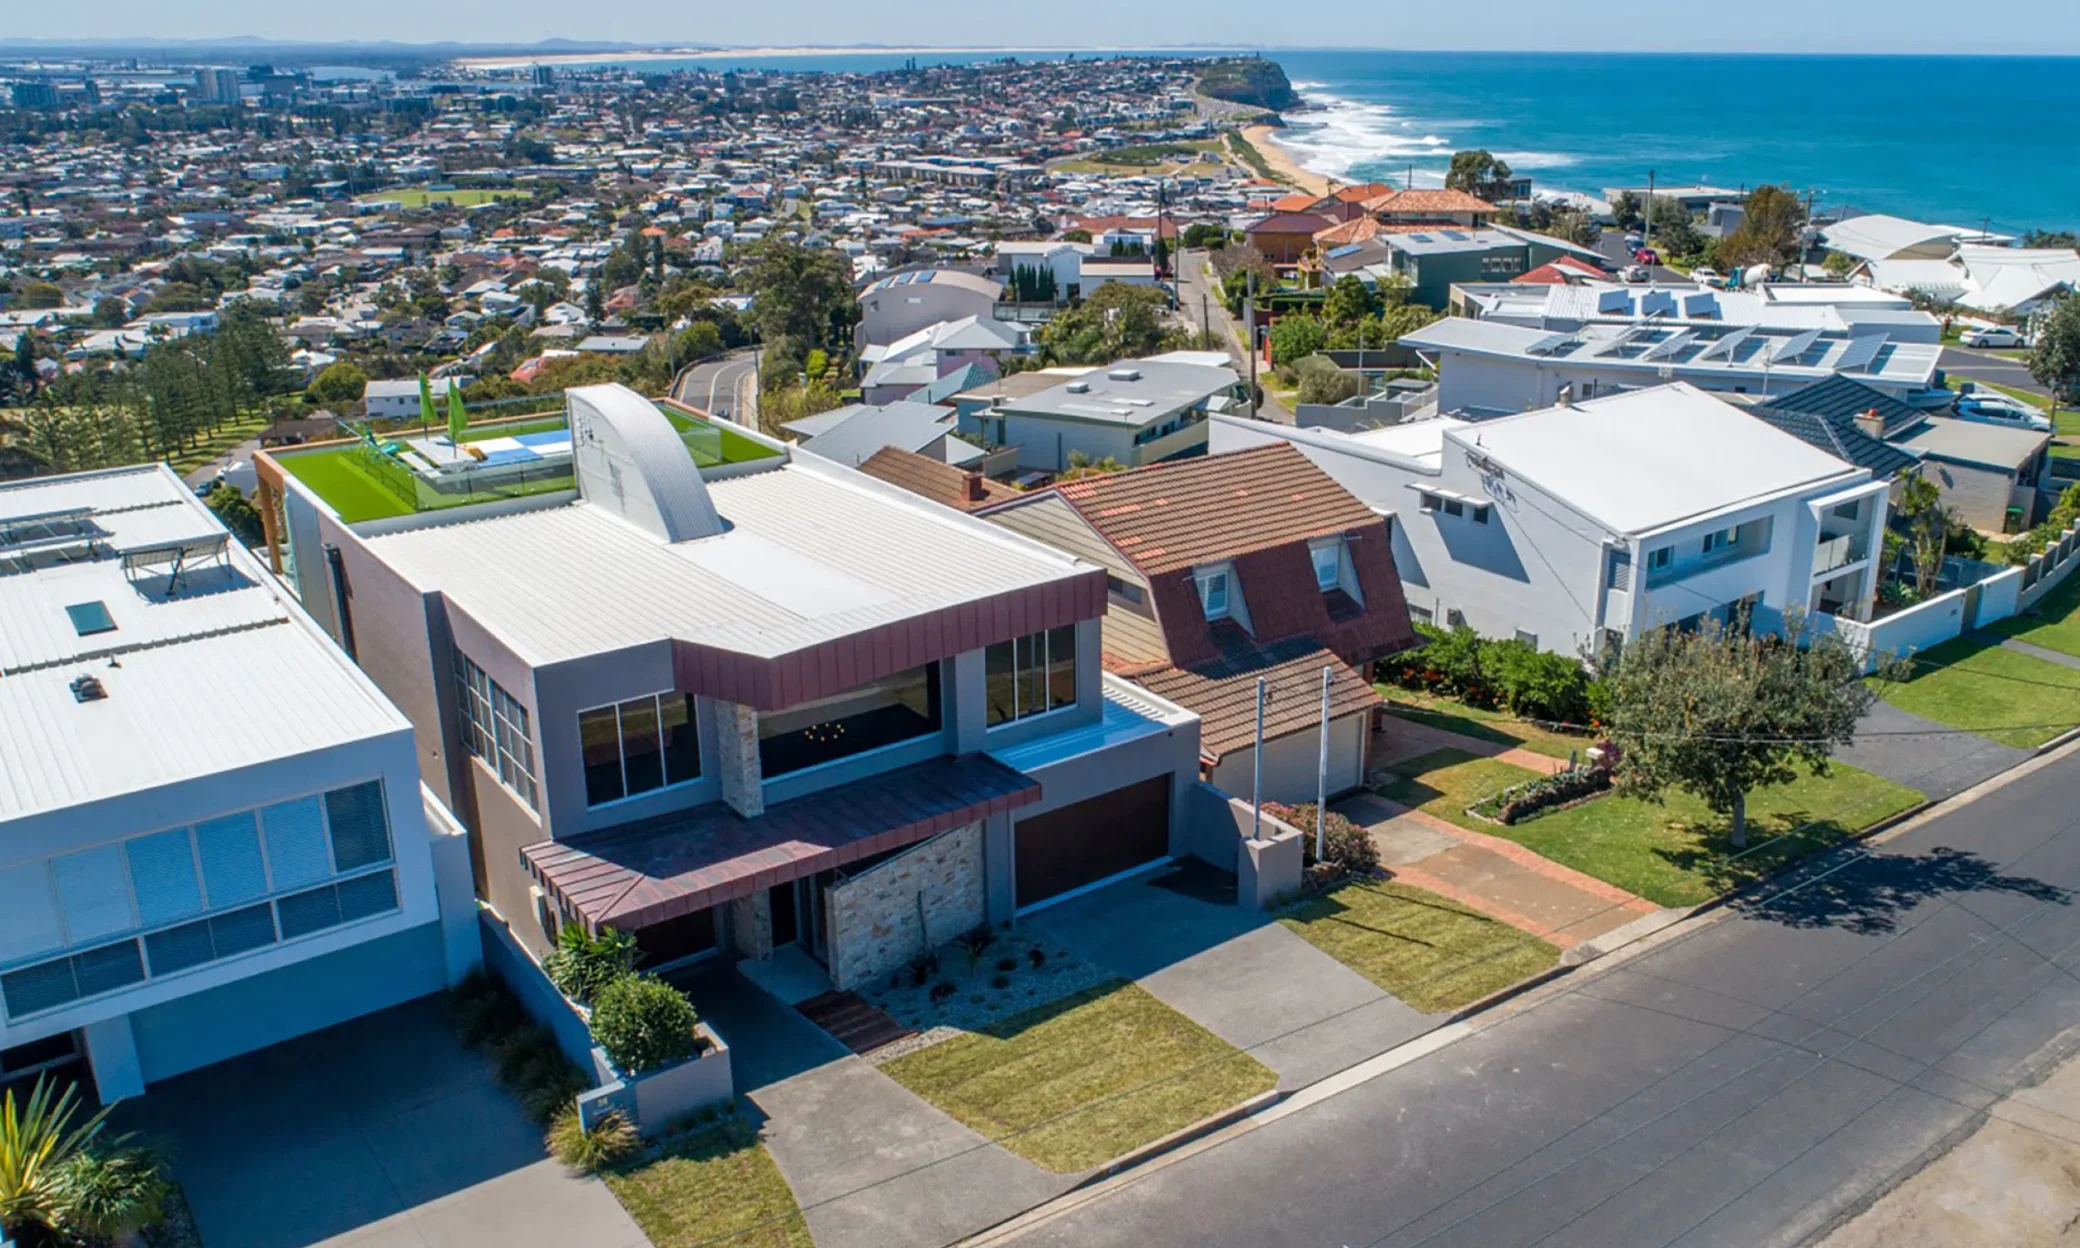 Aerial view of a coastal neighborhood in Port Stephens featuring modern houses with varying designs, predominantly in neutral colors, situated close to each other along a street, overlooking a scenic ocean in the background.